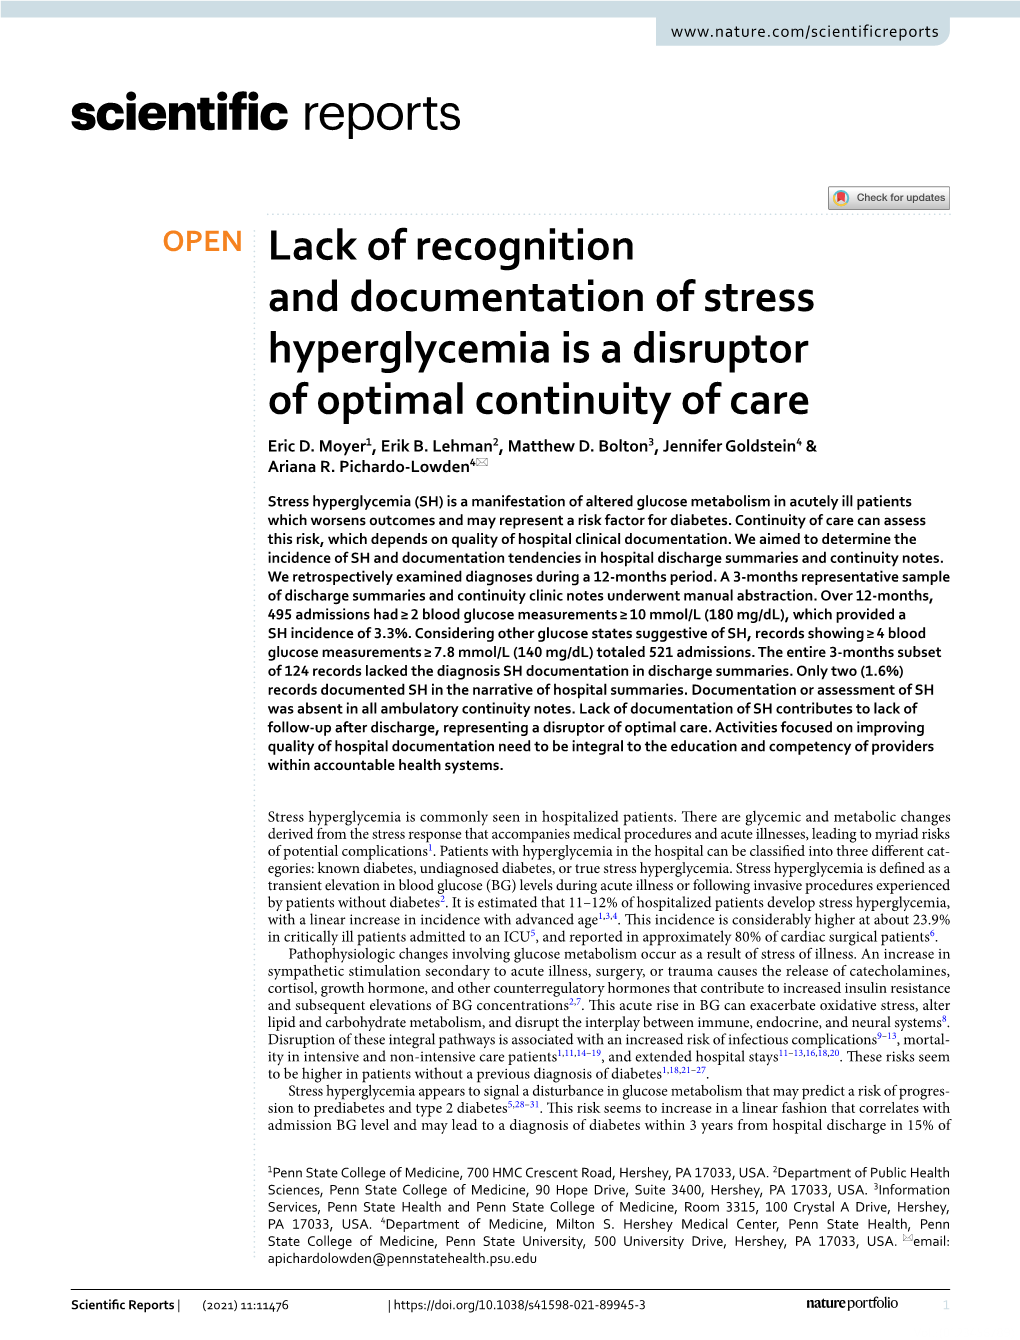 Lack of Recognition and Documentation of Stress Hyperglycemia Is a Disruptor of Optimal Continuity of Care Eric D